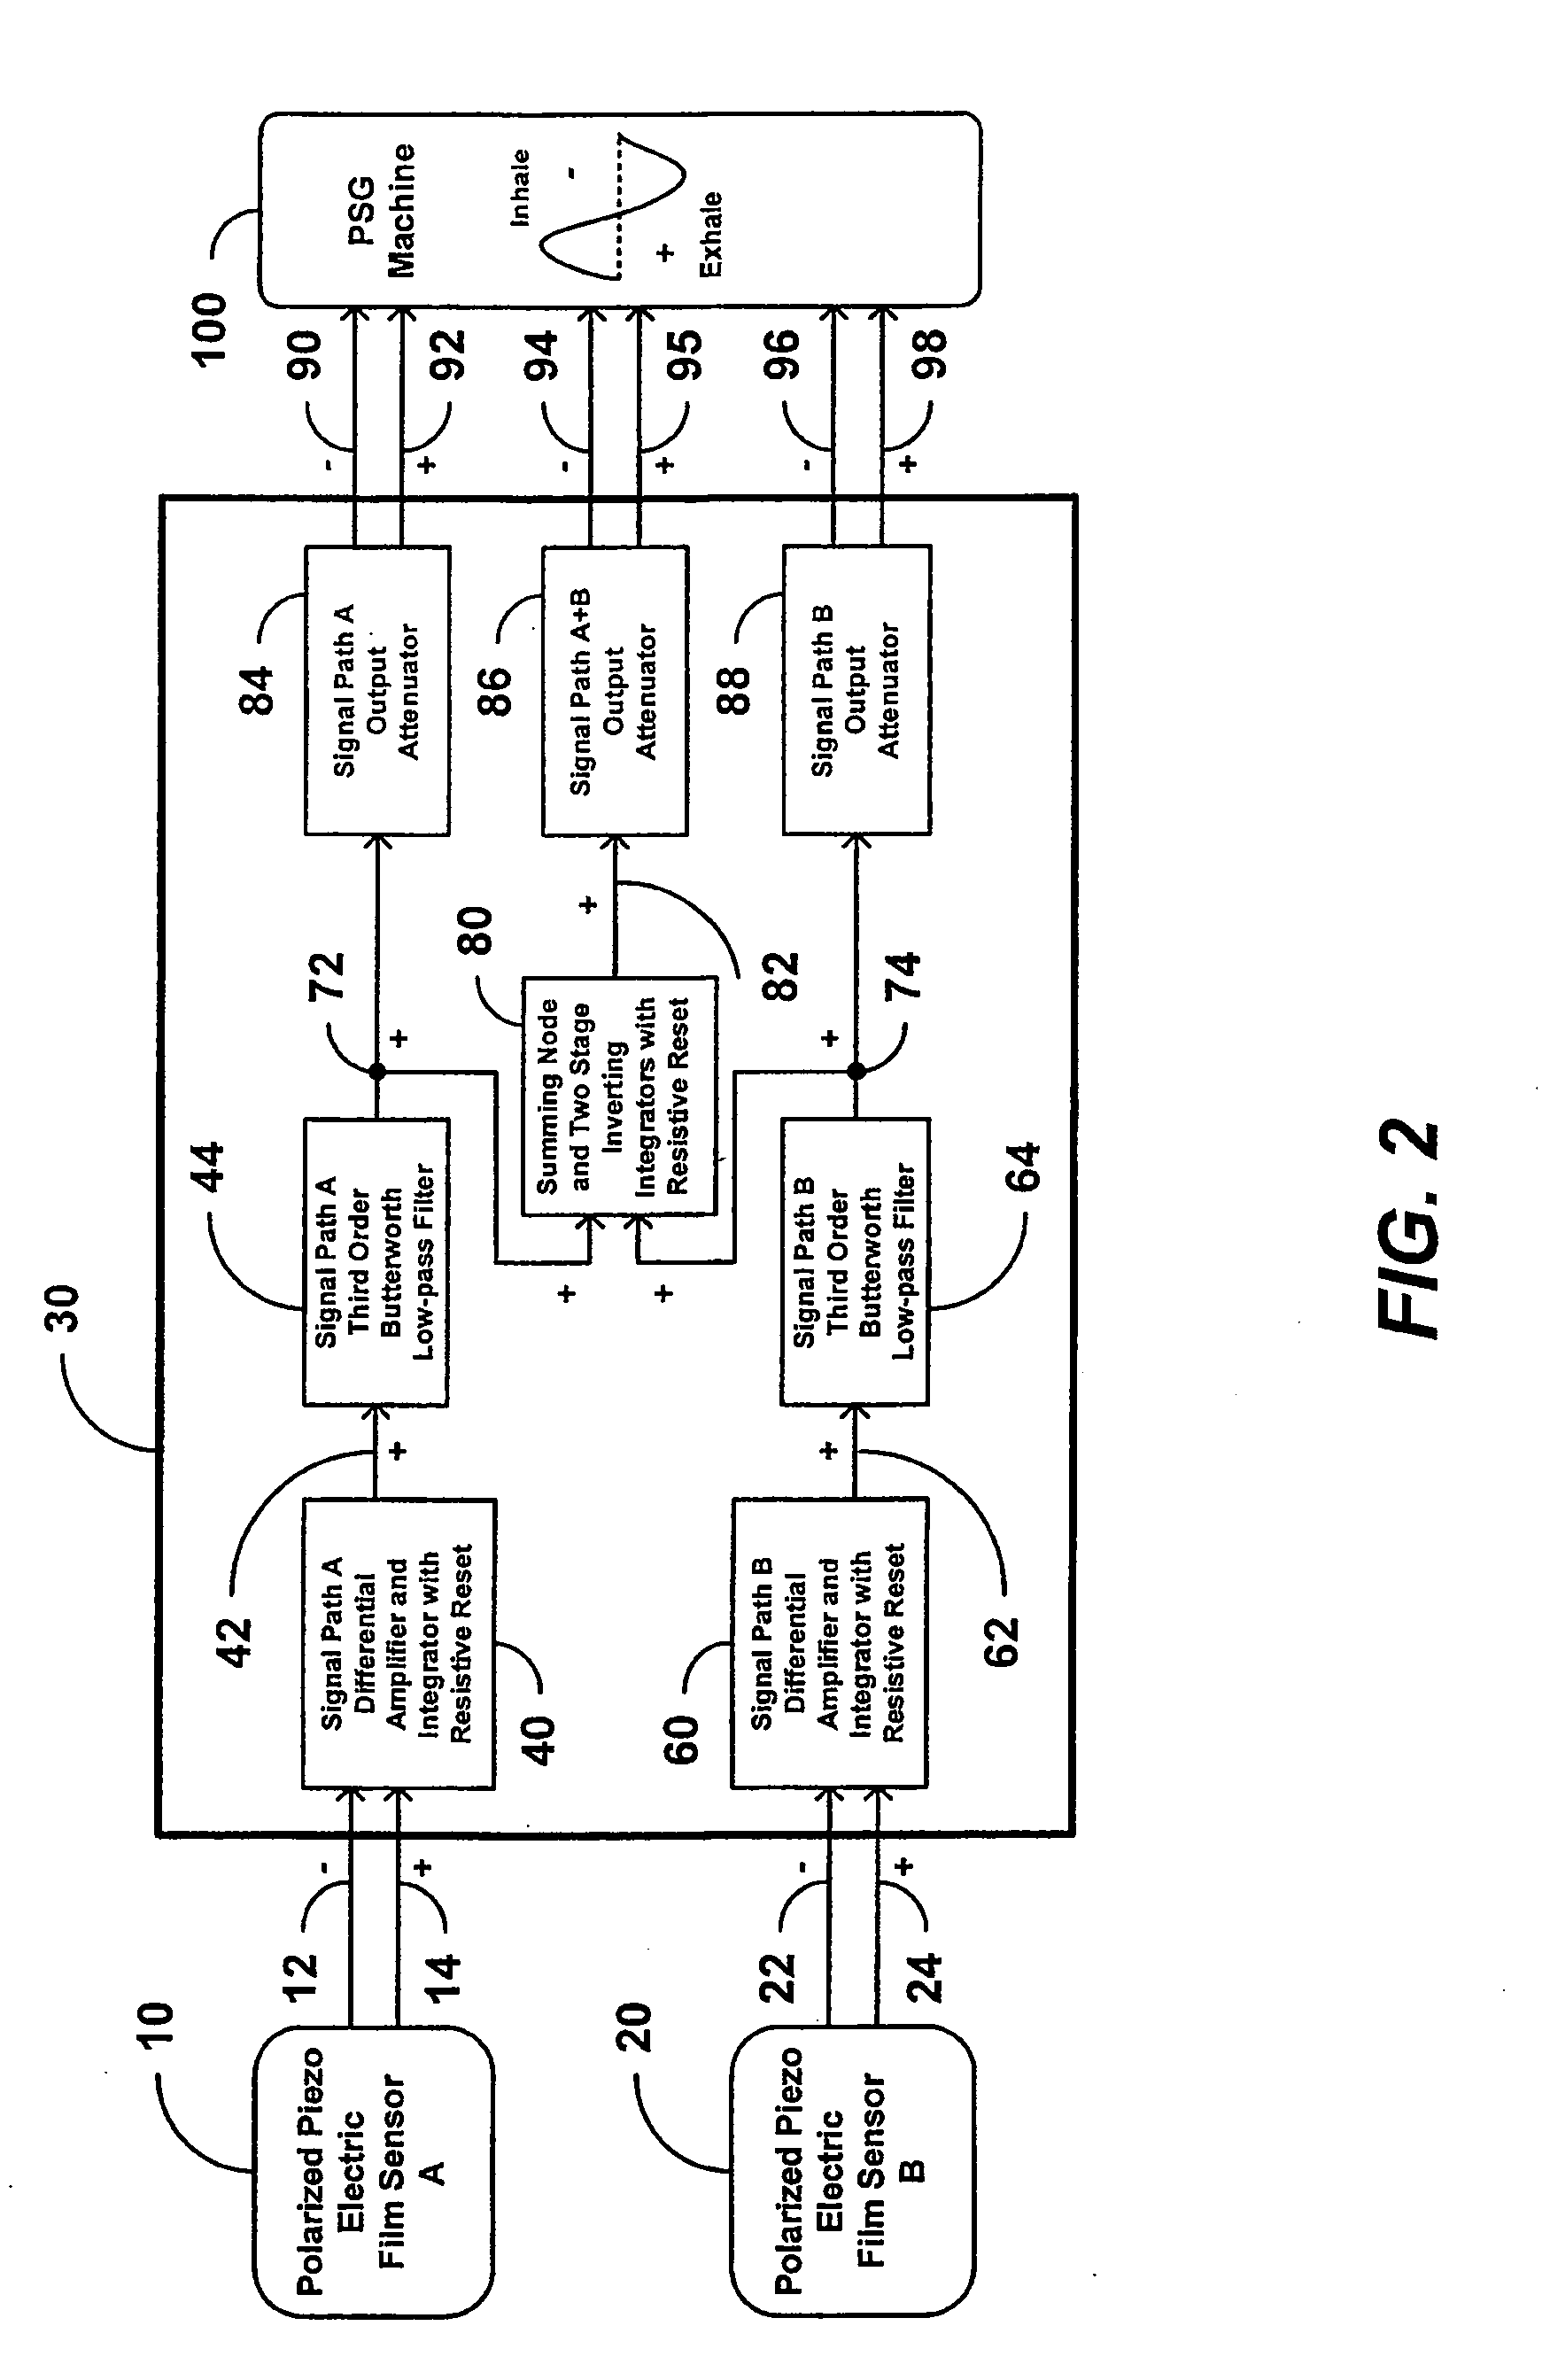 Apparatus and method for creating multiple polarity indicating outputs from two polarized piezoelectric film sensors